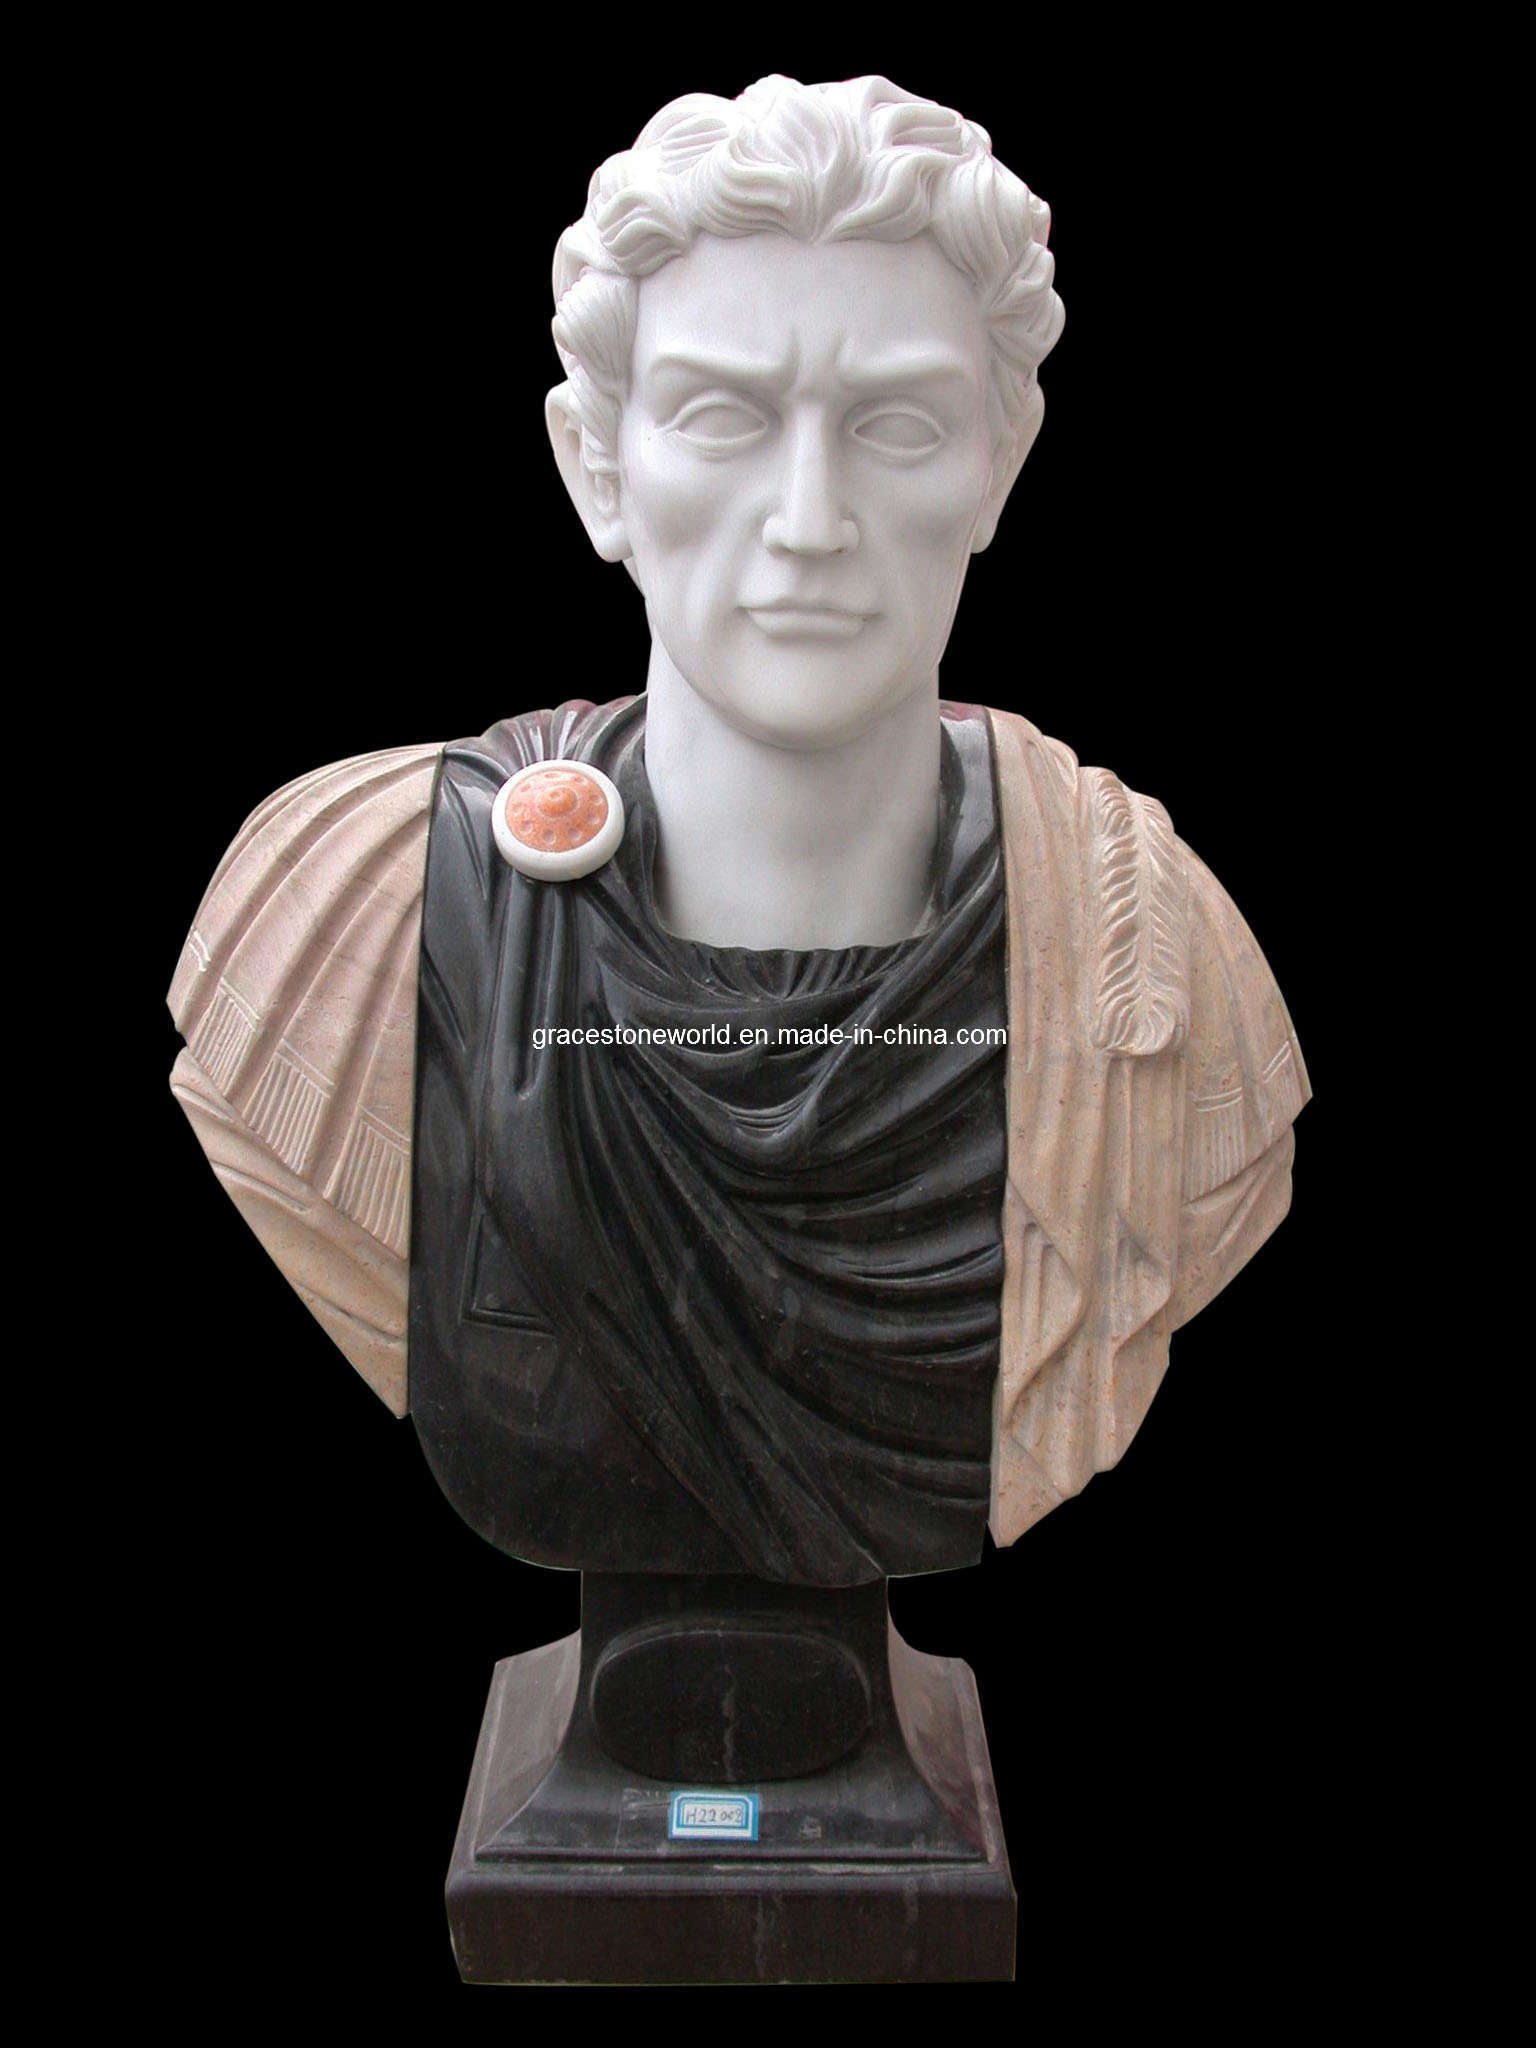 Carved Stone Bust Sculpture, Stone Carving Sculpture (GS-MB-077)